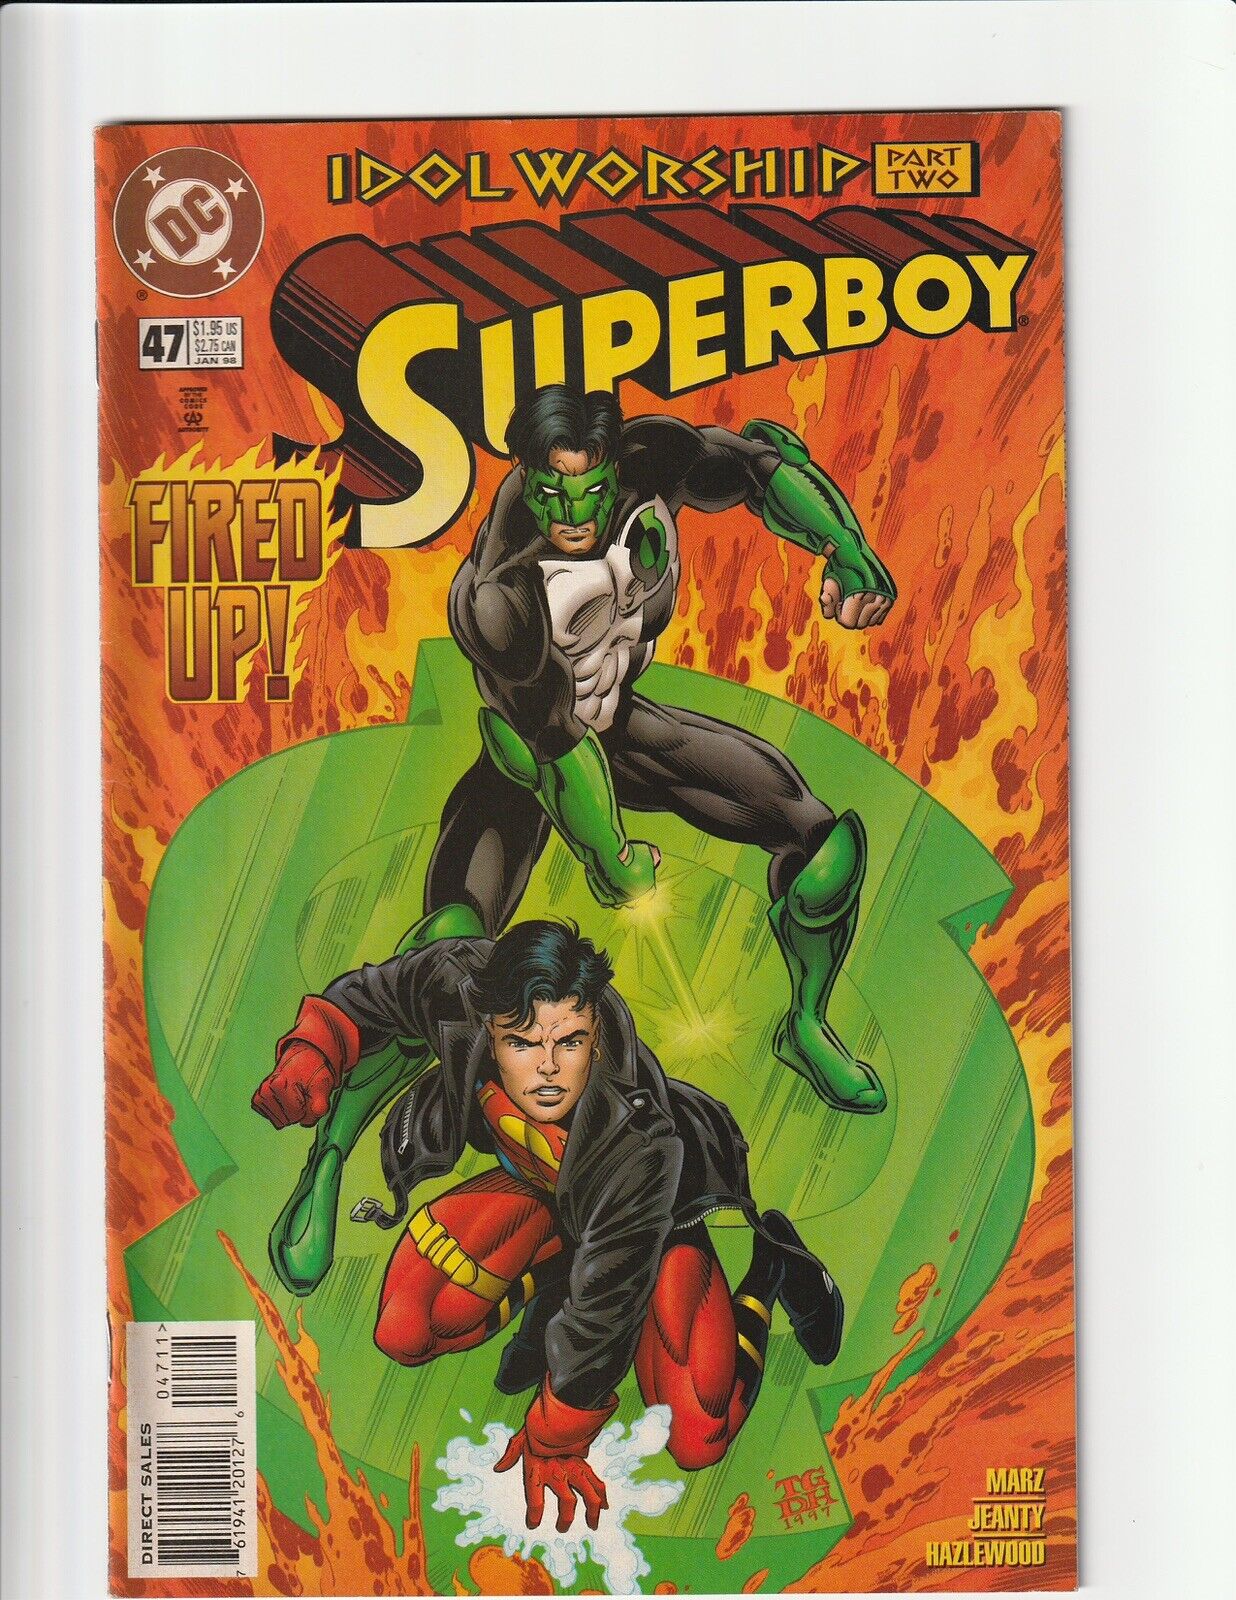 Superboy (1994 series) #47 iNear Mint + condition.